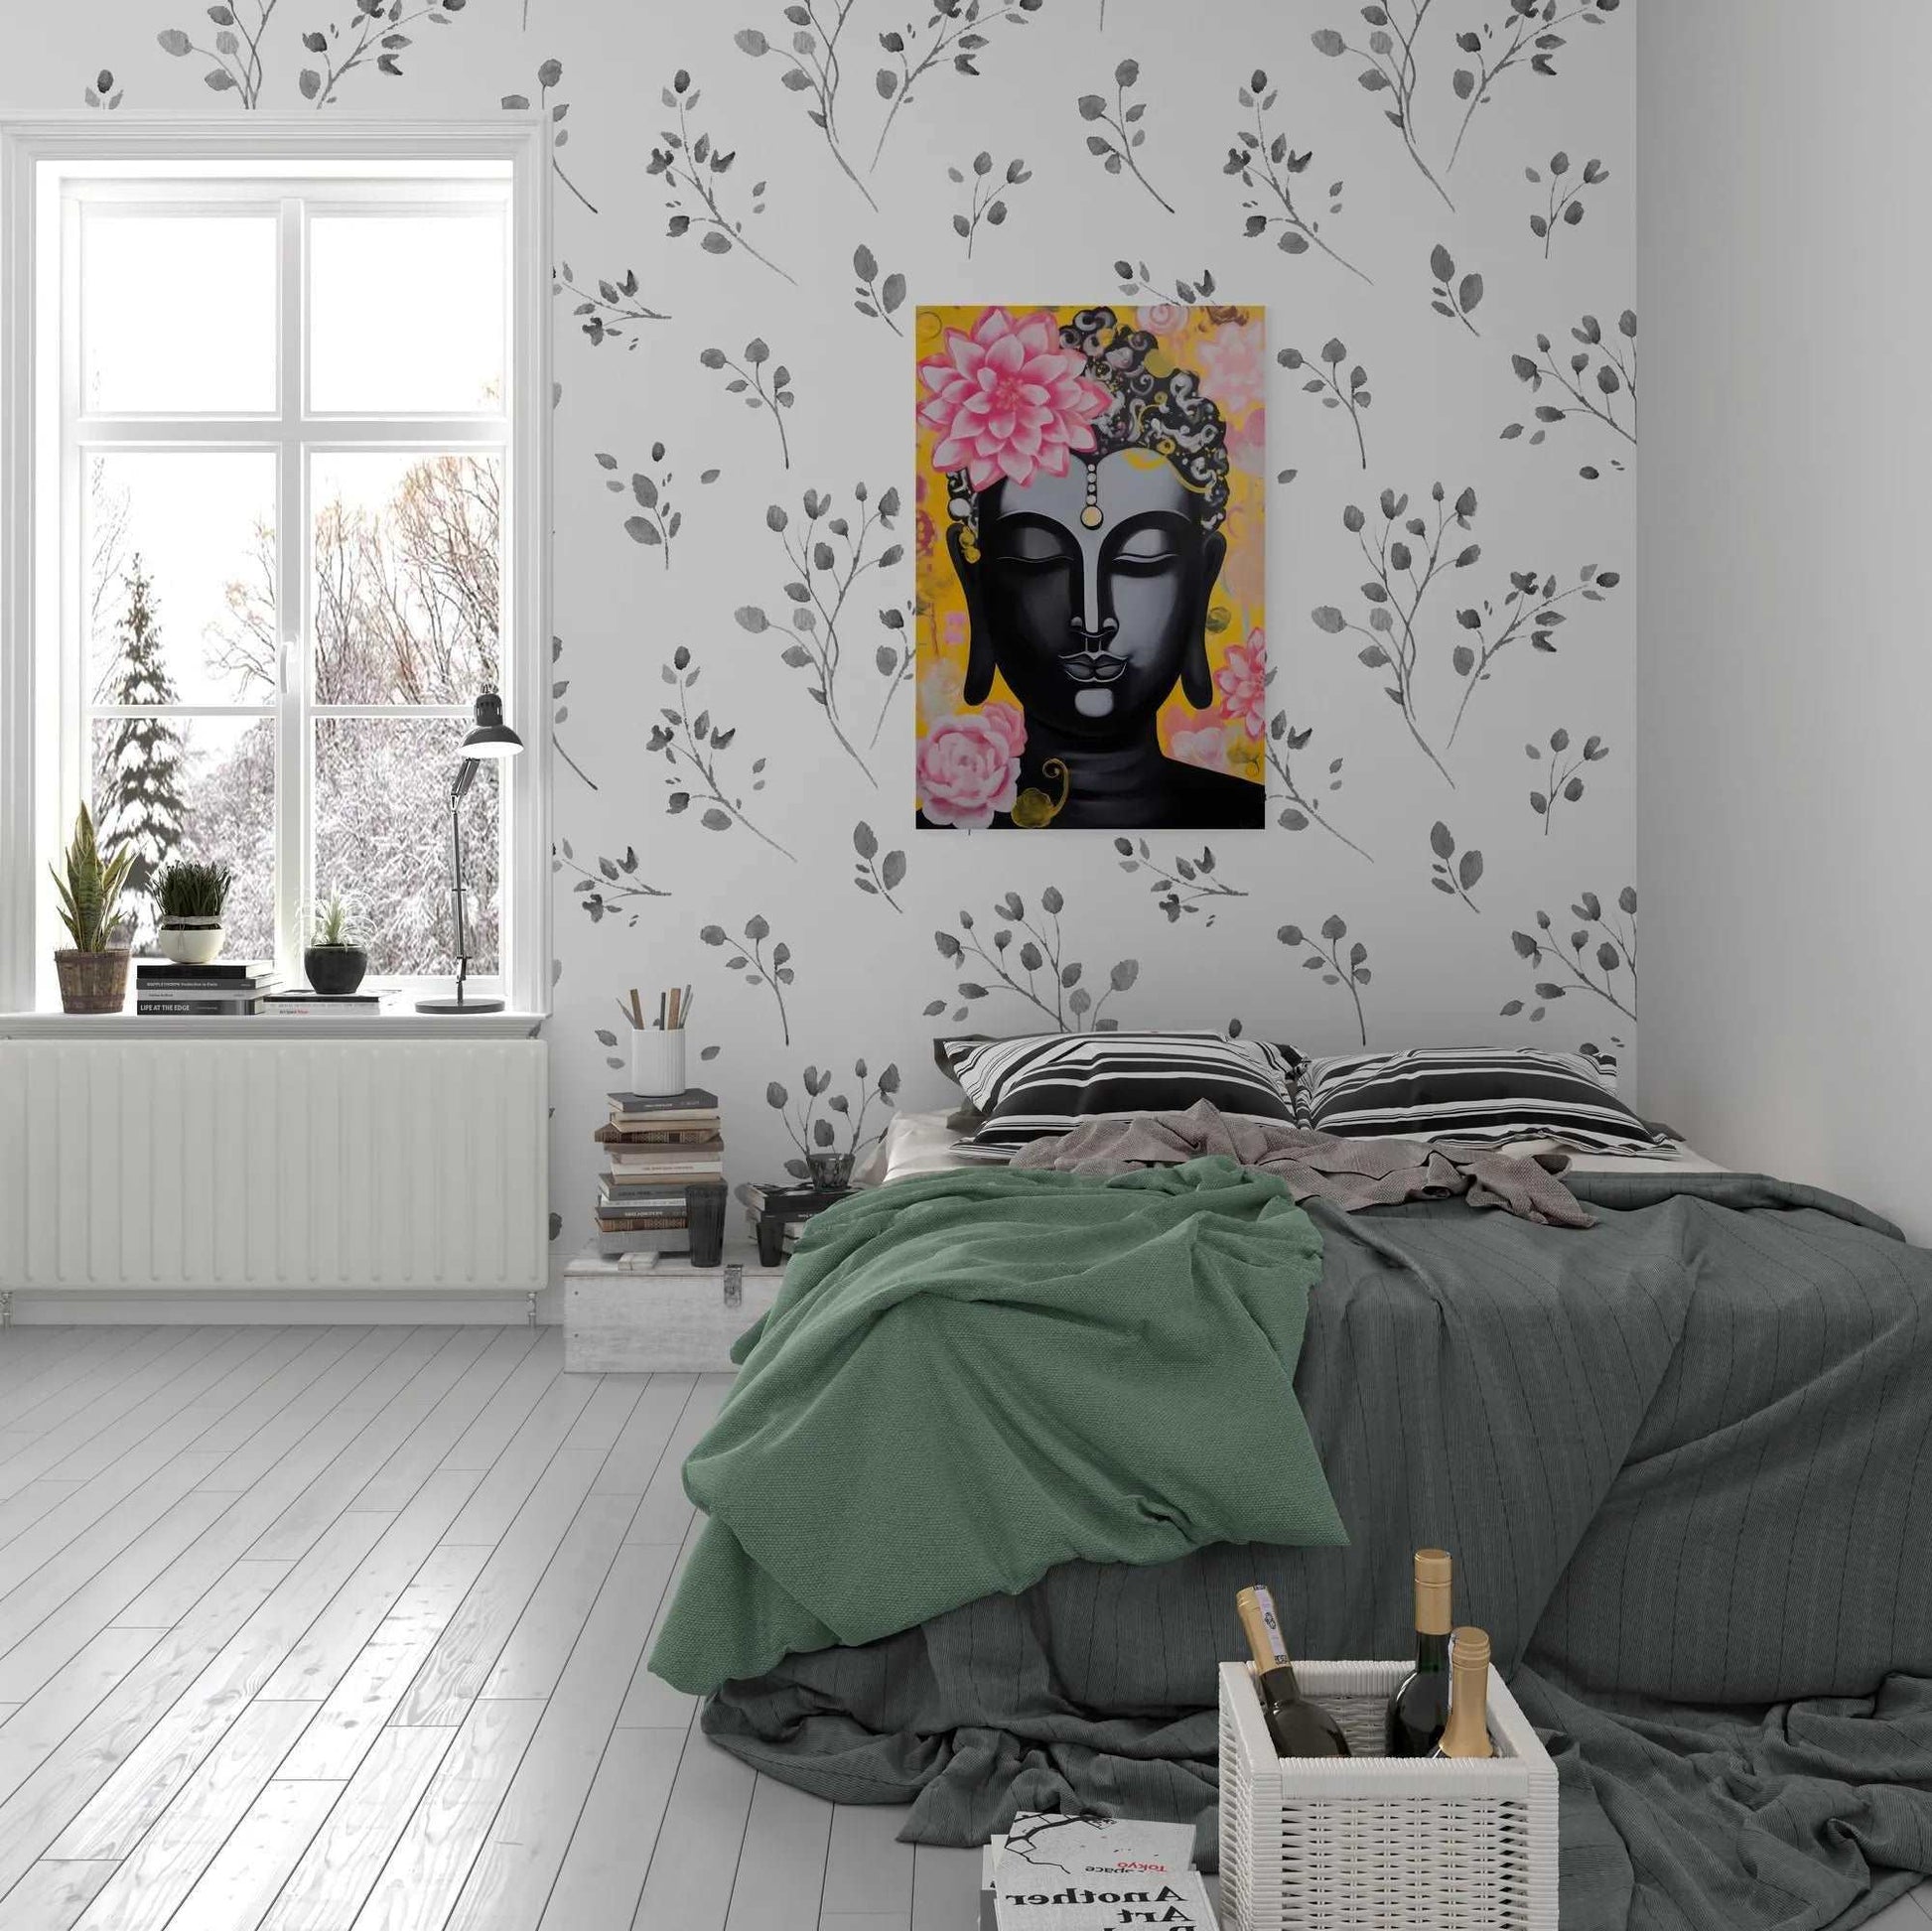 Bedroom with botanical wallpaper complemented by a Buddha painting with pink flowers, creating a tranquil retreat.